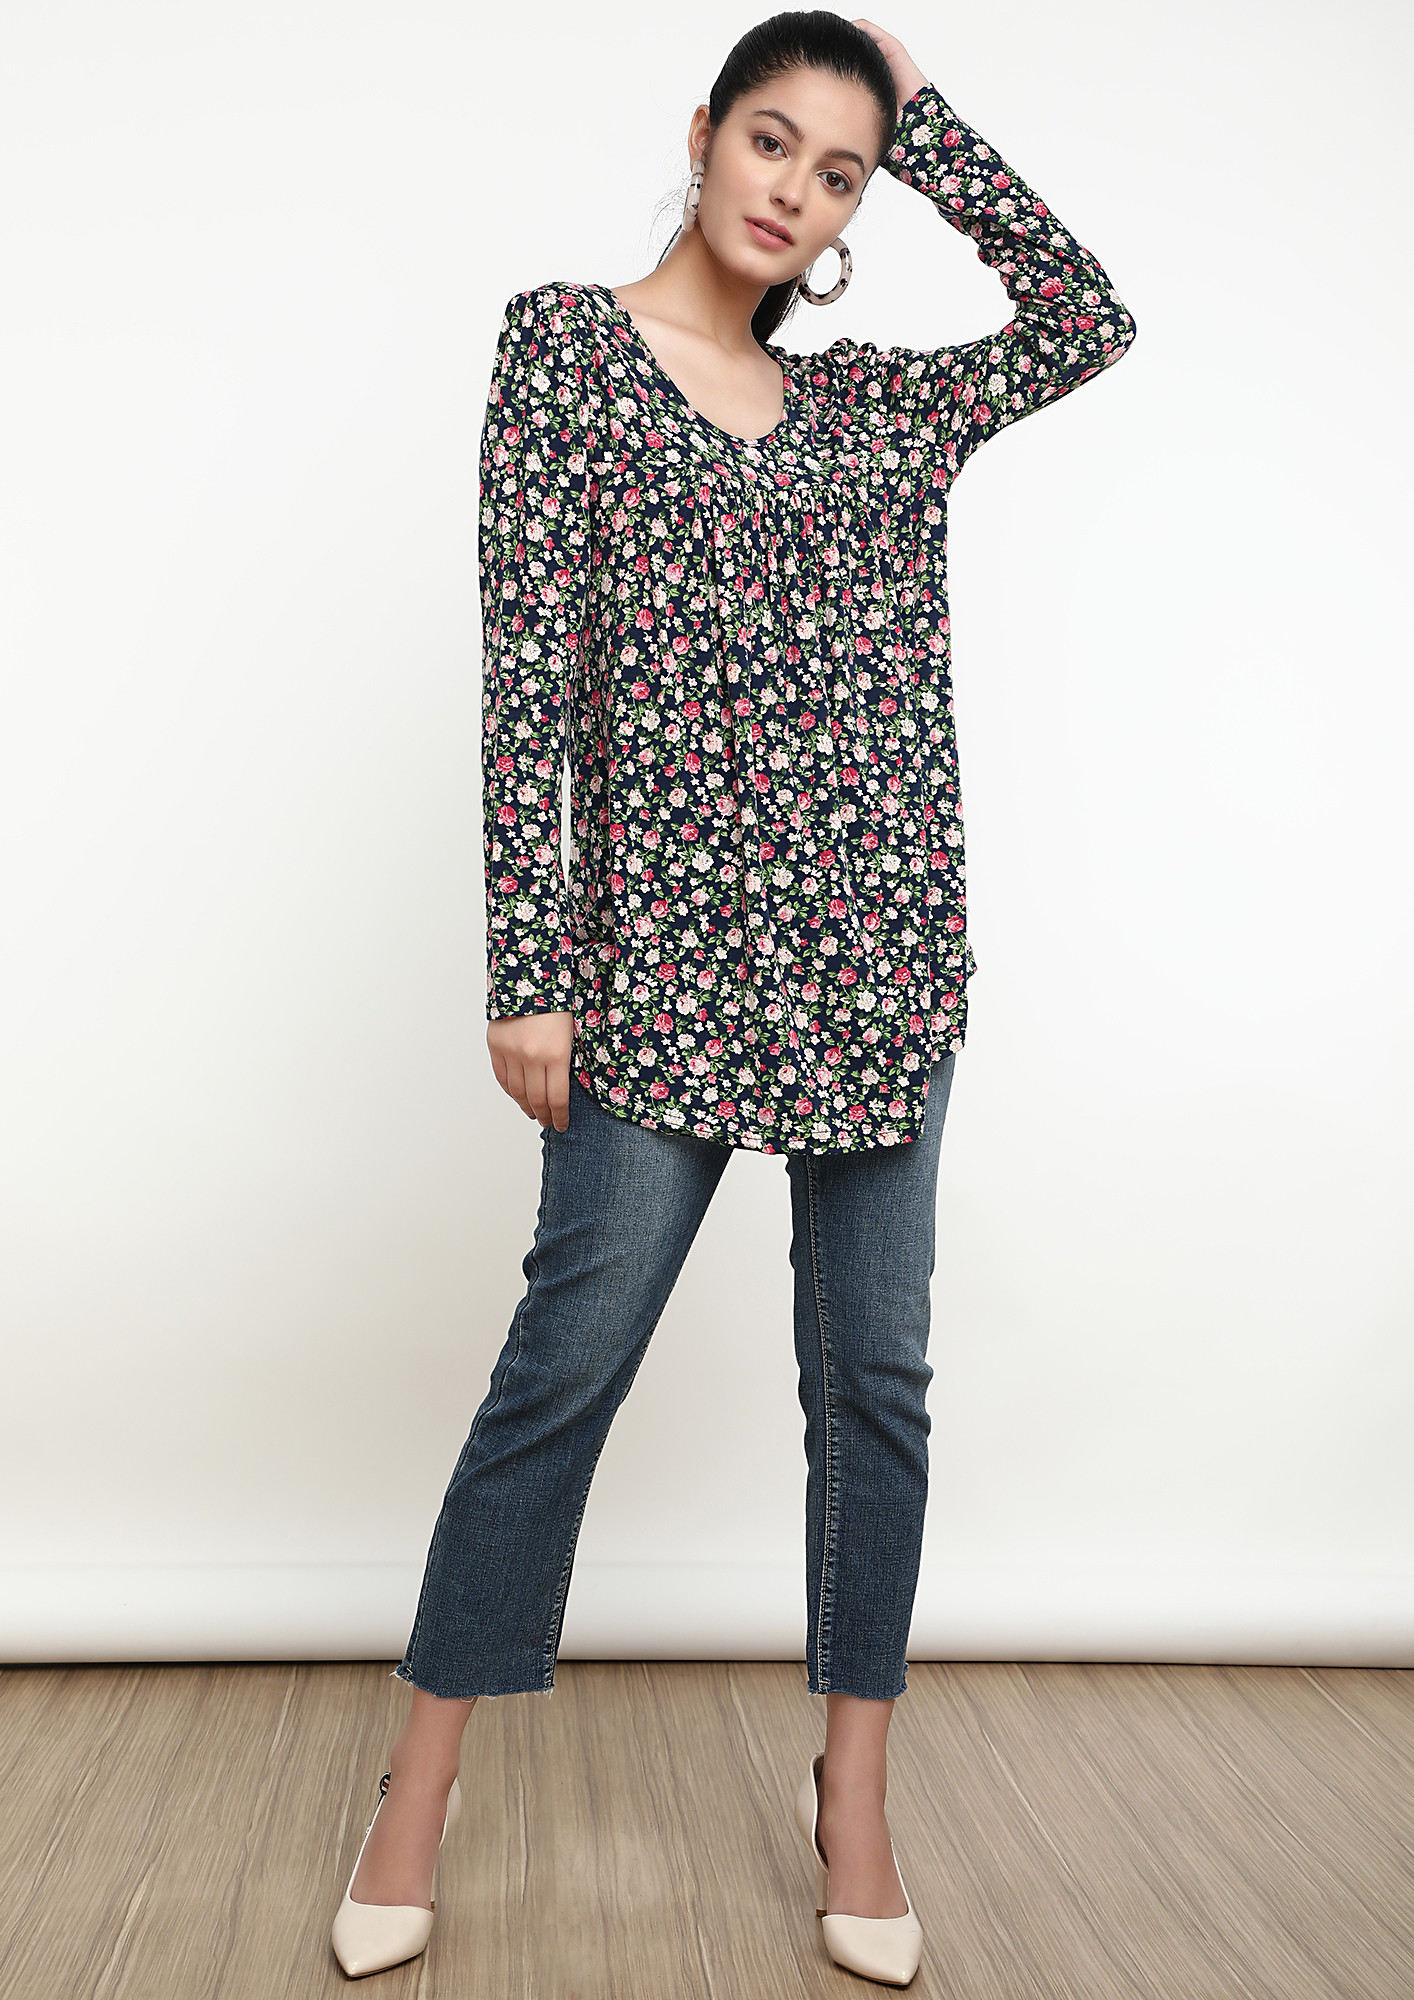 ON A FLOWER TRIP NAVY TUNIC TOP